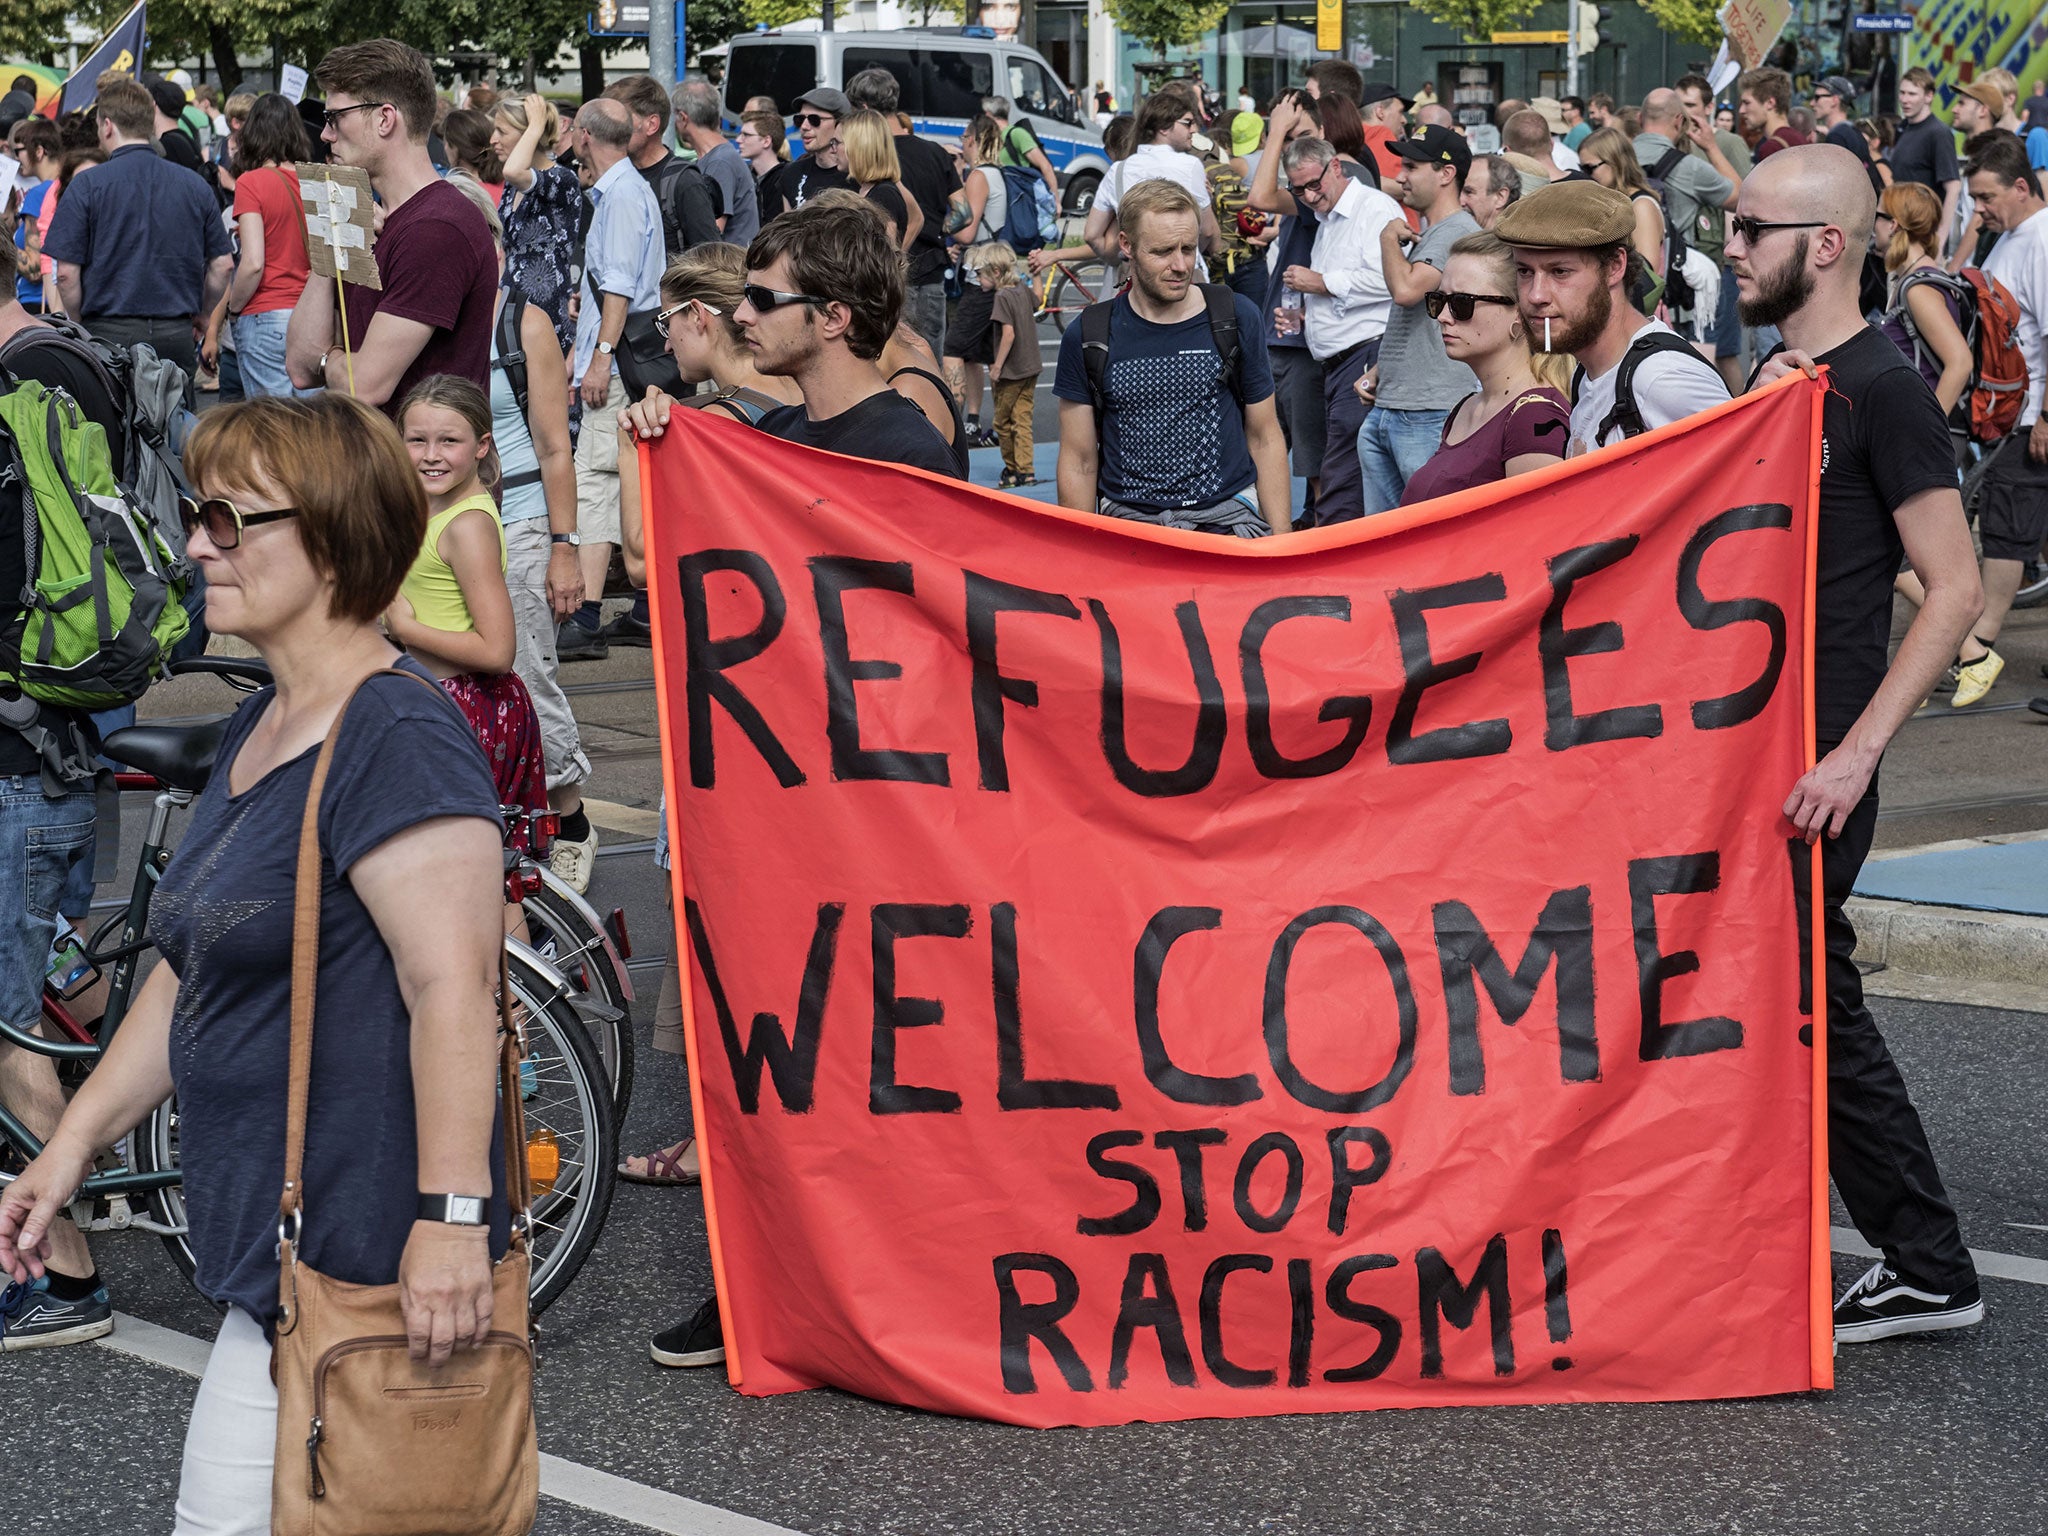 Germany has been more welcoming to refugees